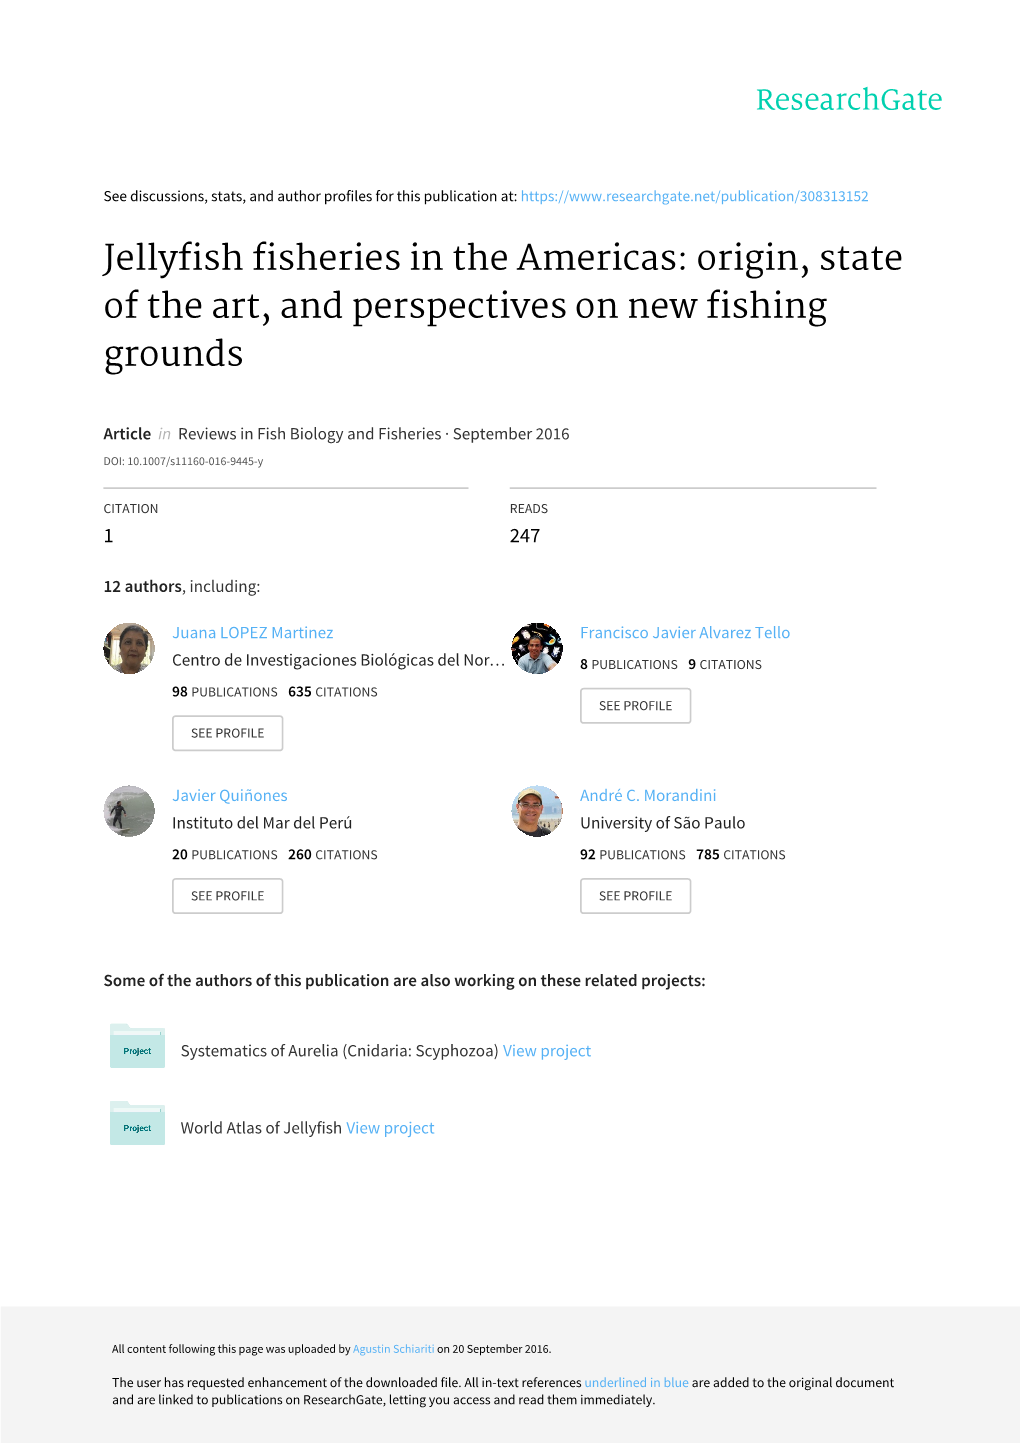 Jellyfish Fisheries in the Americas: Origin, State of the Art, and Perspectives on New Fishing Grounds